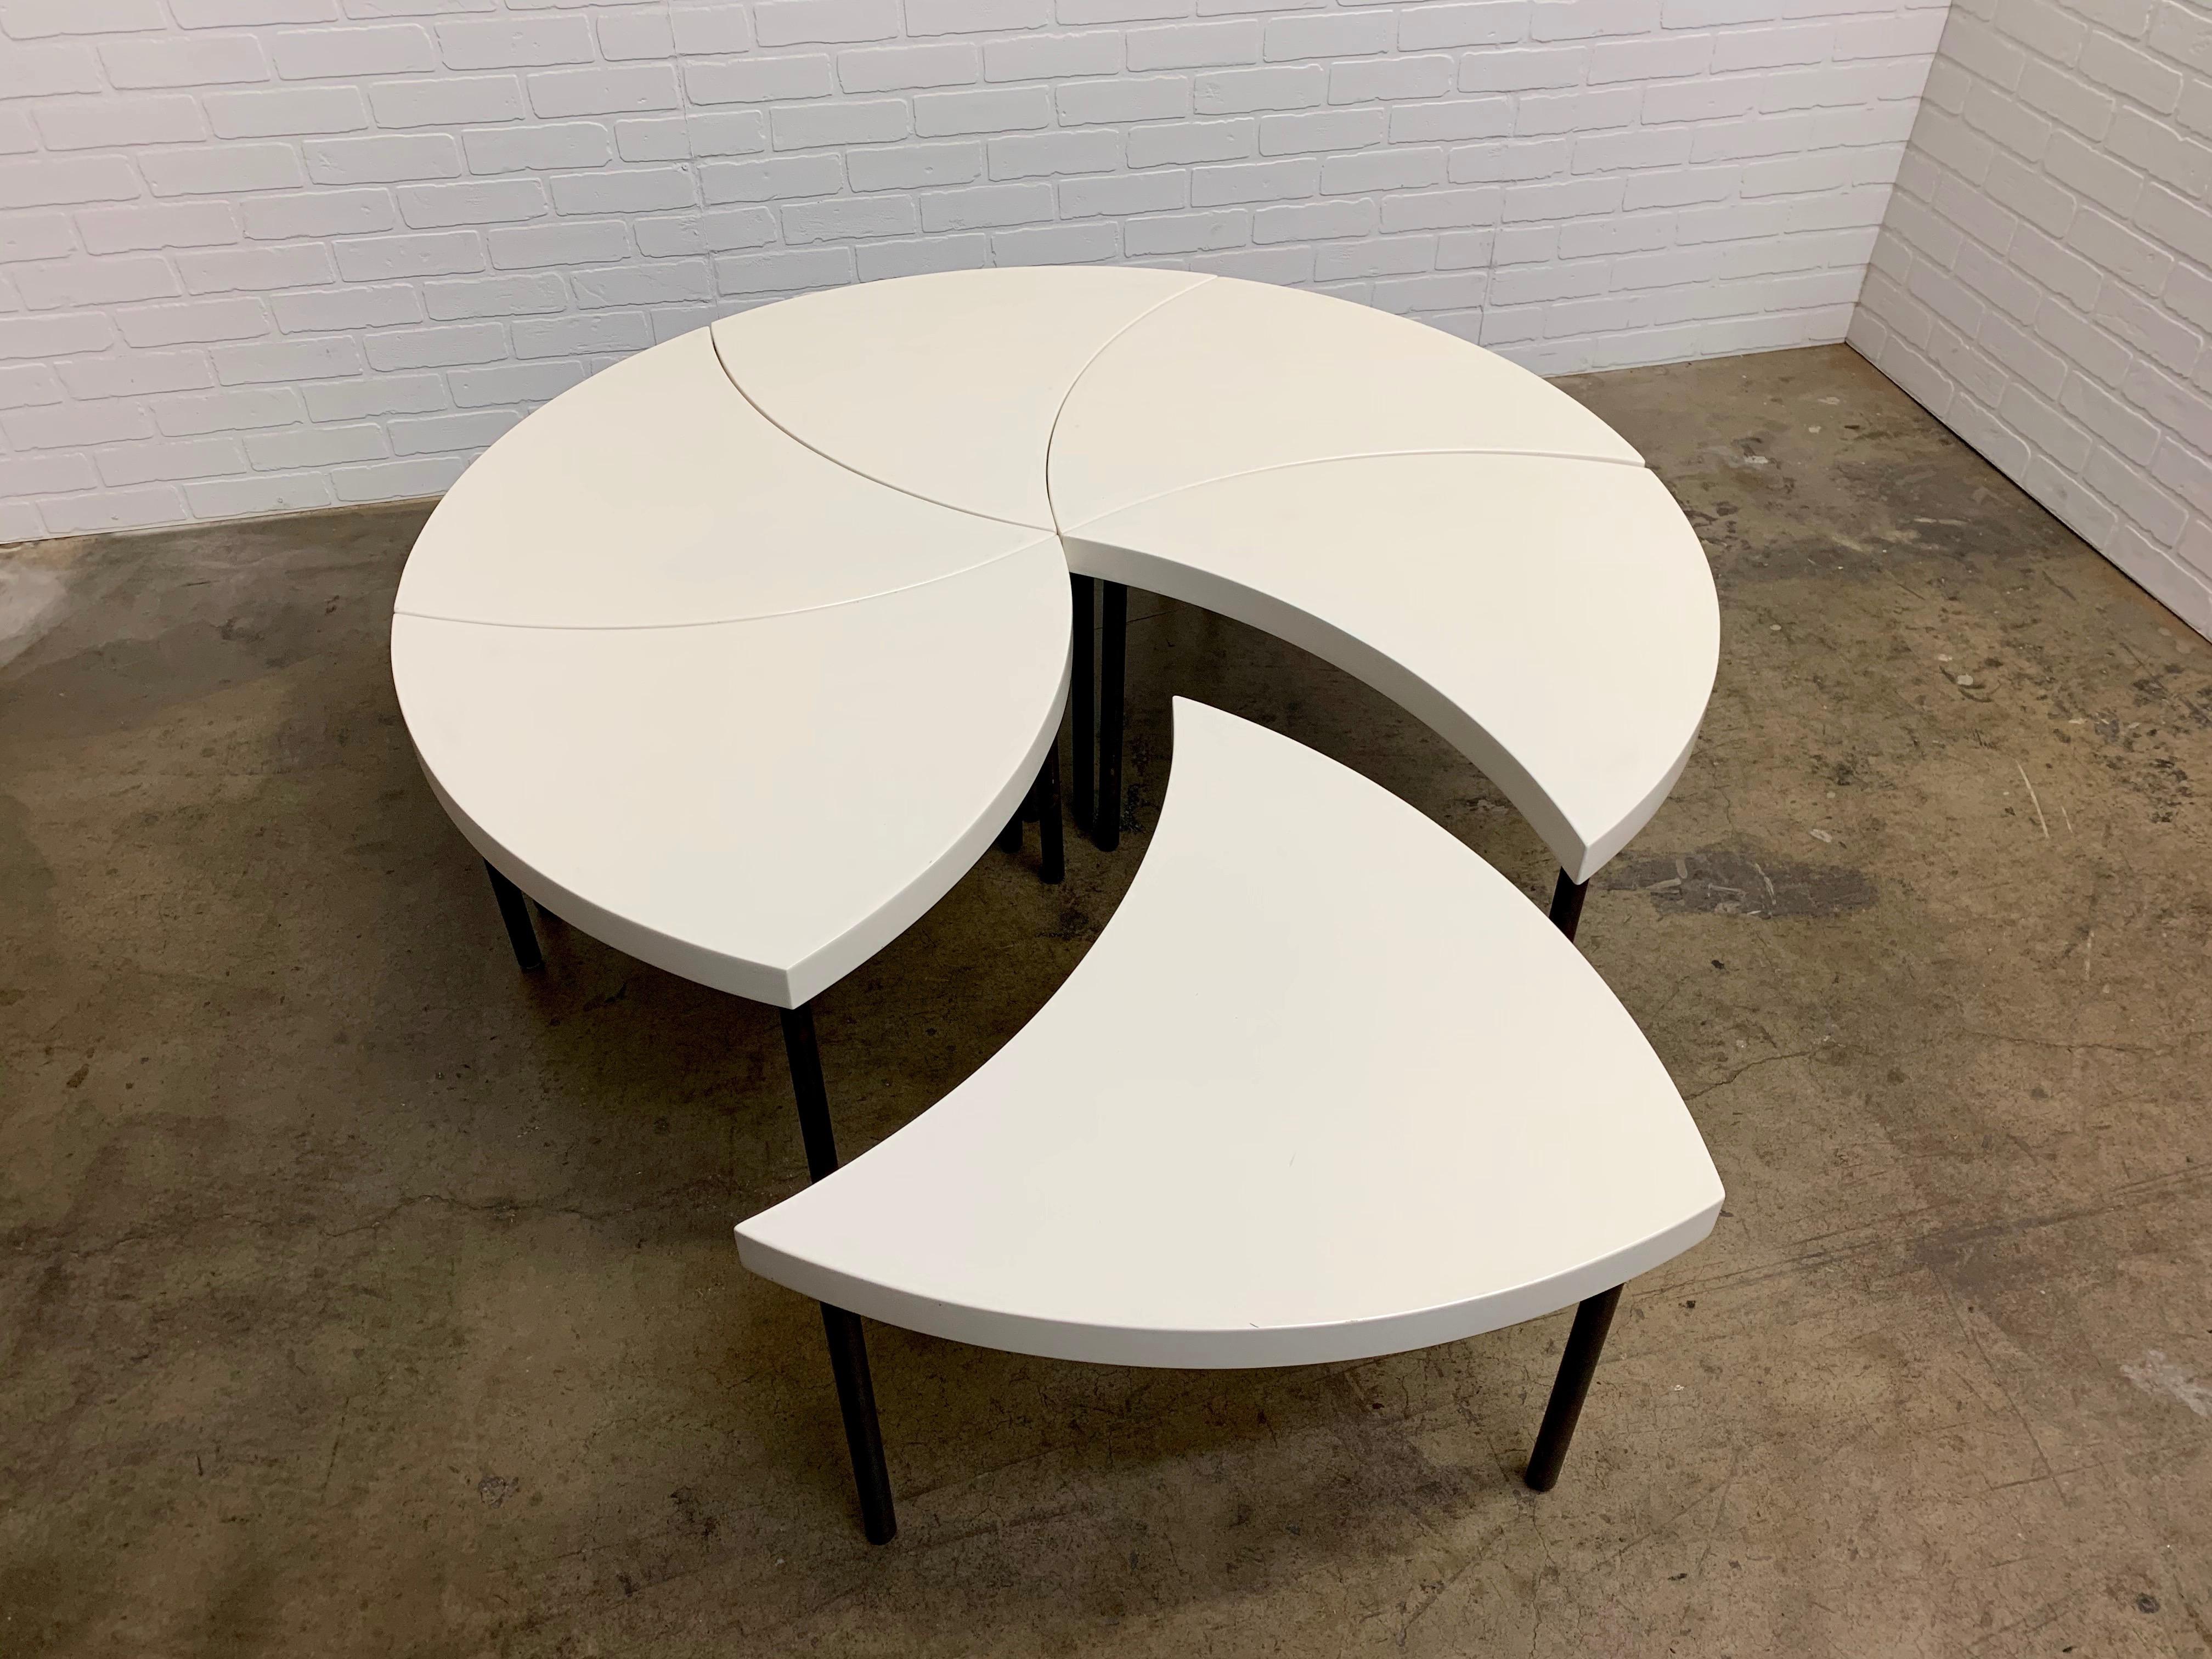 Modernist modular coffee table / side tables. High quality construction. White lacquered tops with brass legs. This piece can be configured to best suit your needs. Can also work as side tables. Each piece measures: 25.5